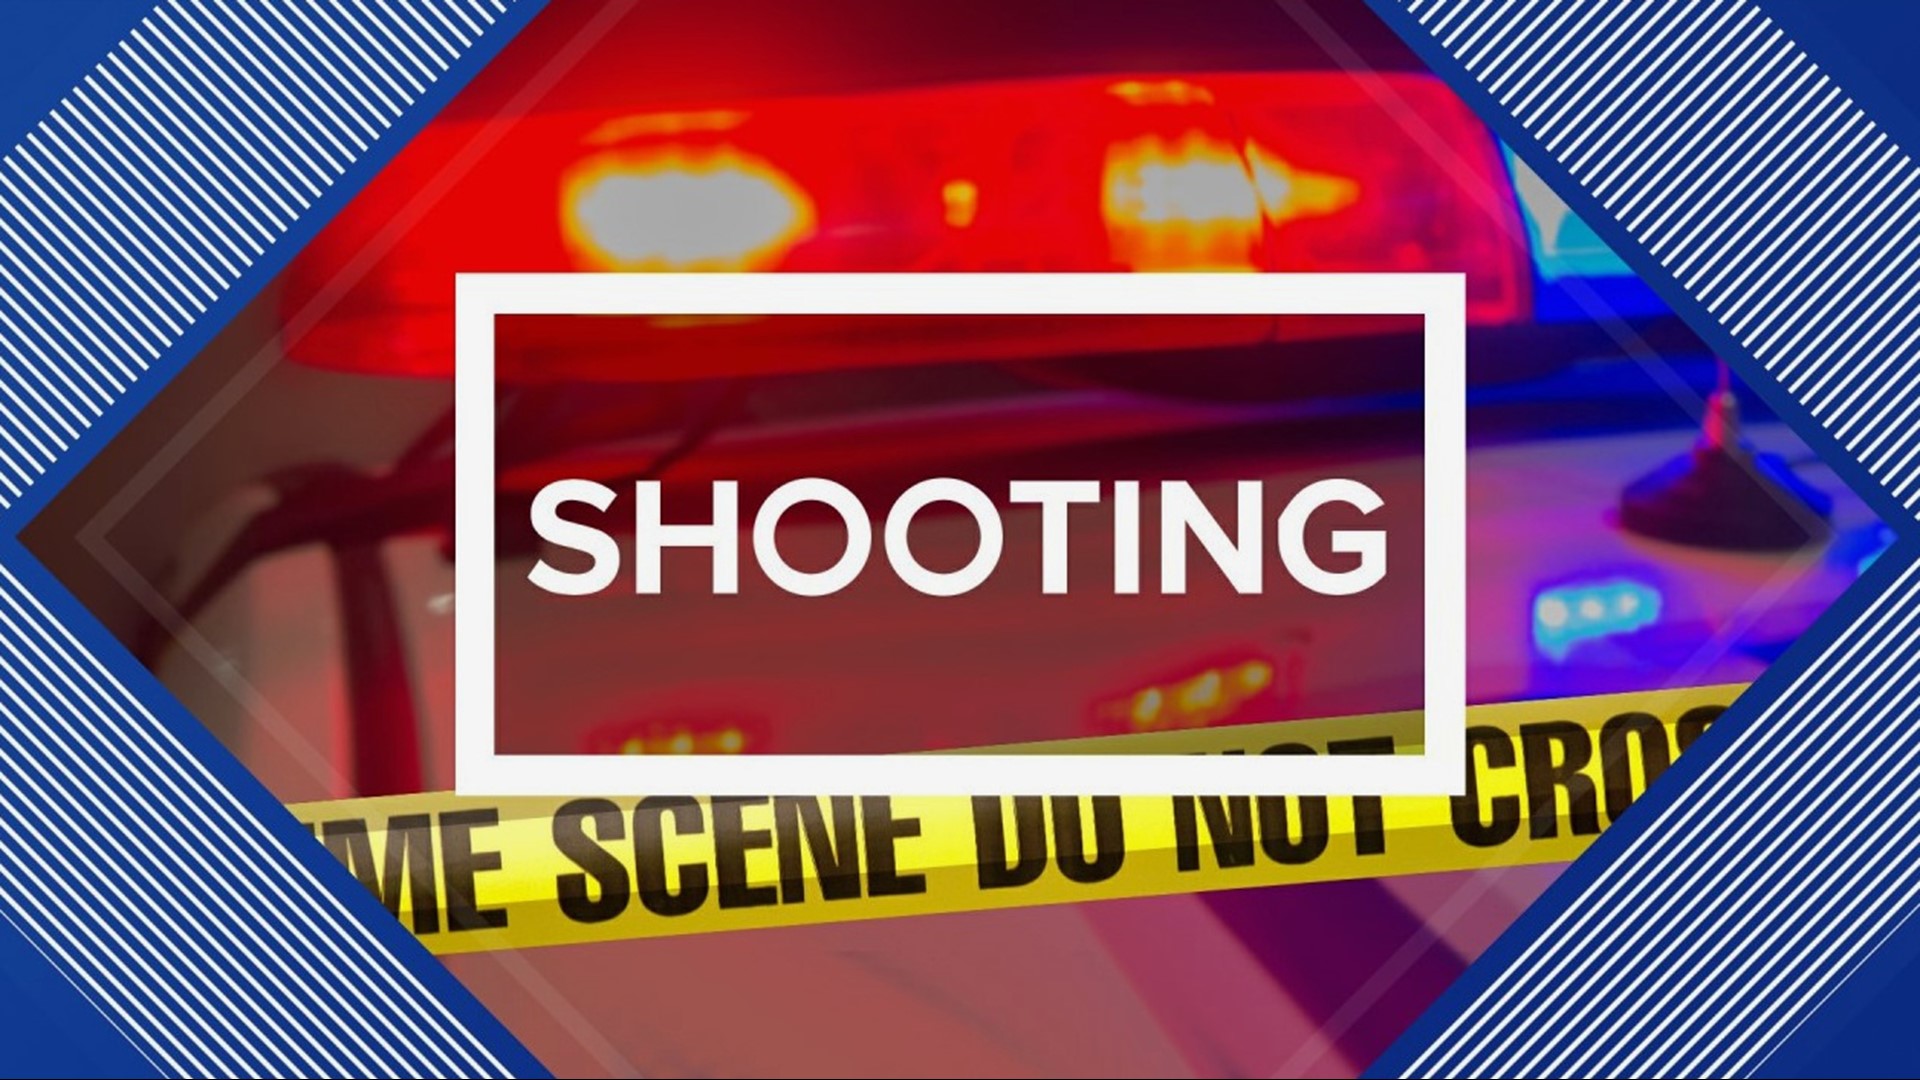 The shooting happened just before 3 p.m. along South Sumner Avenue in the city's west side.